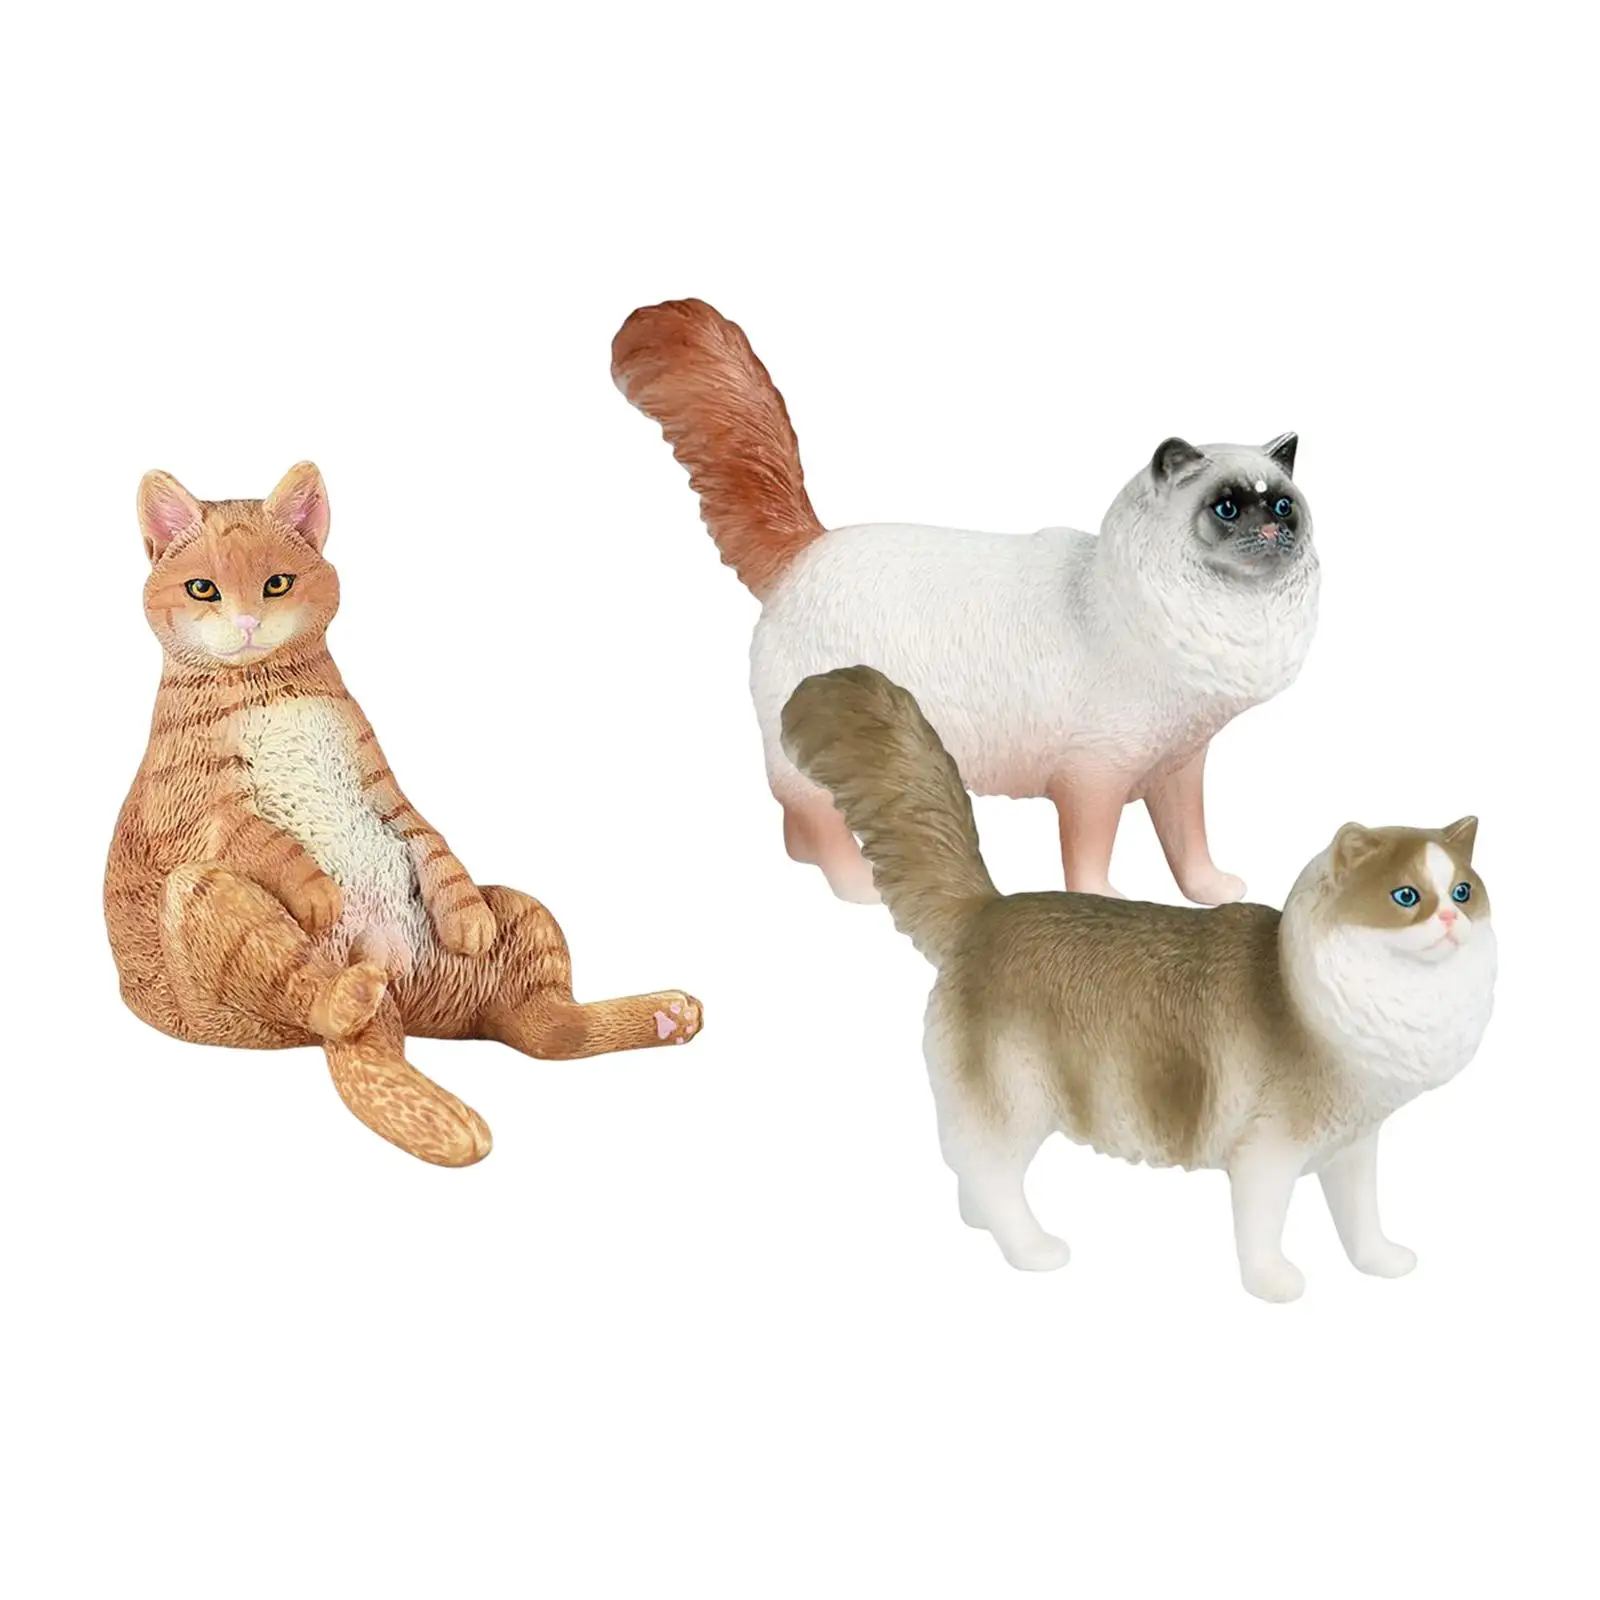 Cat Figurines Small Animals Figures Animal Cat Characters Toys Figurine for Home Decor Birthday Gifts